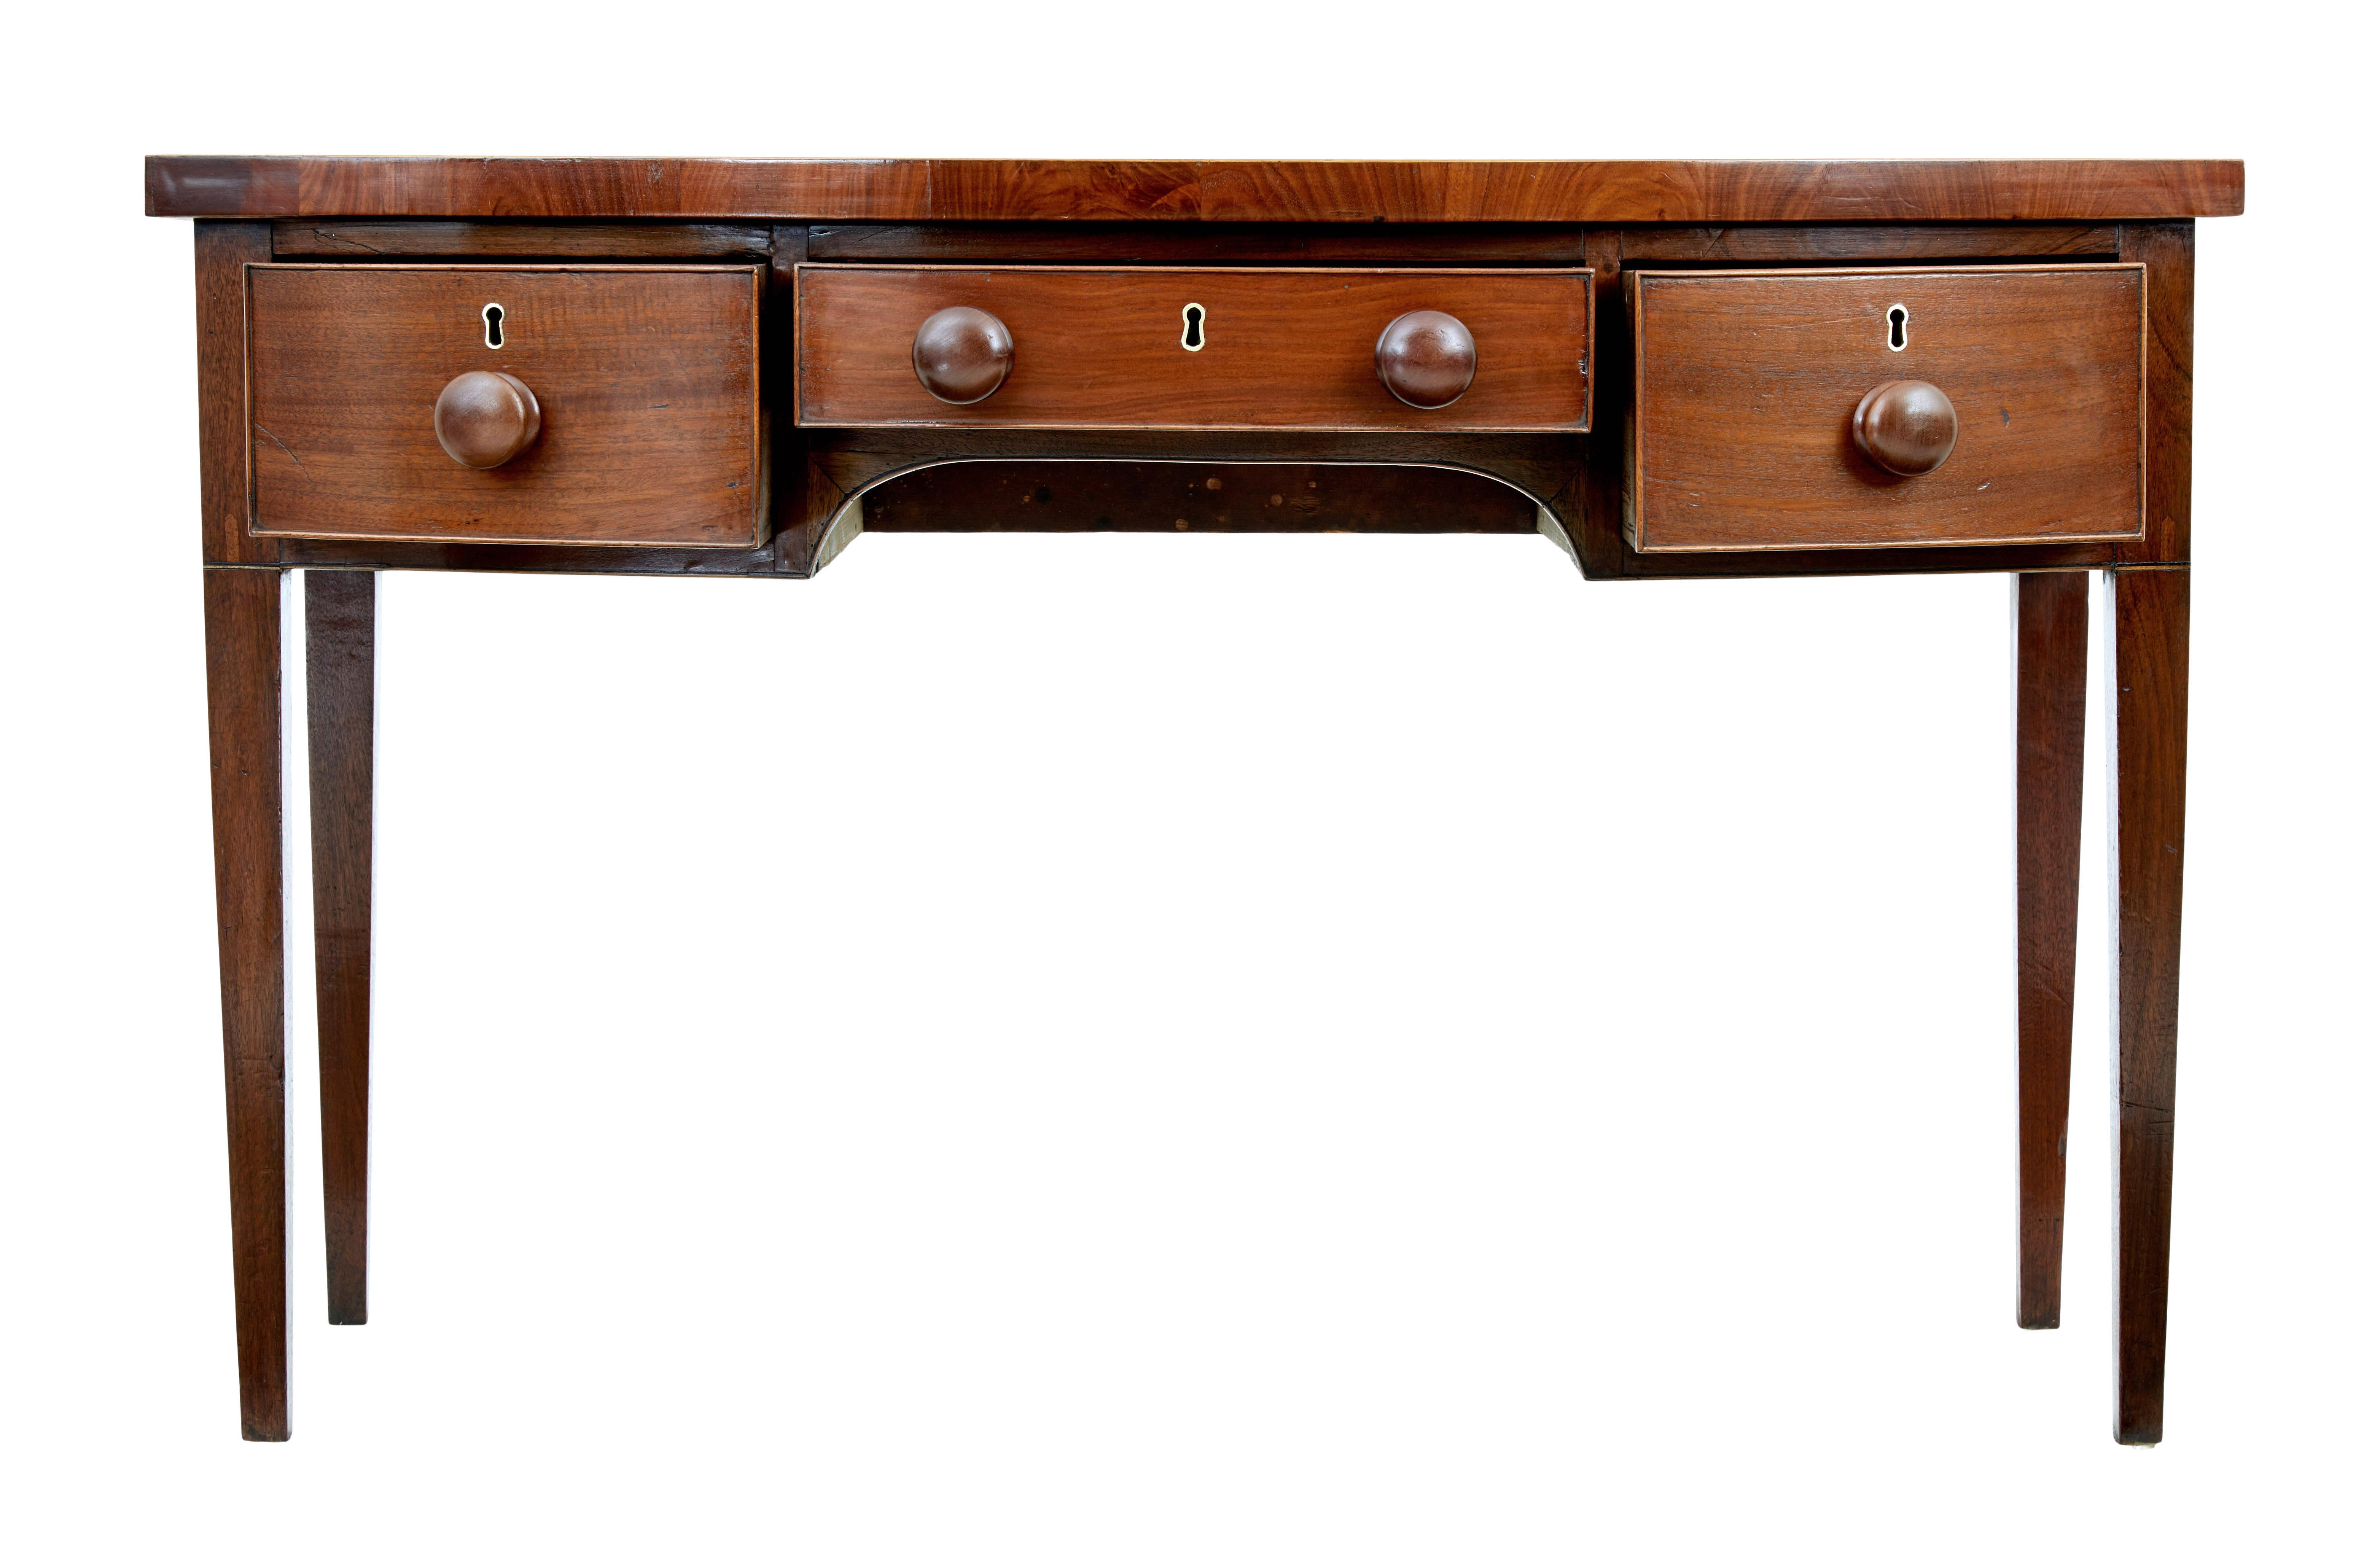 Mid 19th century mahogany bowfront sideboard circa 1850.

Good quality bowfront sideboard/serving table from the mid 19th century.

1 piece mahogany top, showing the whole grain of the tree, with a boxwood strung detailing around the outer edge.